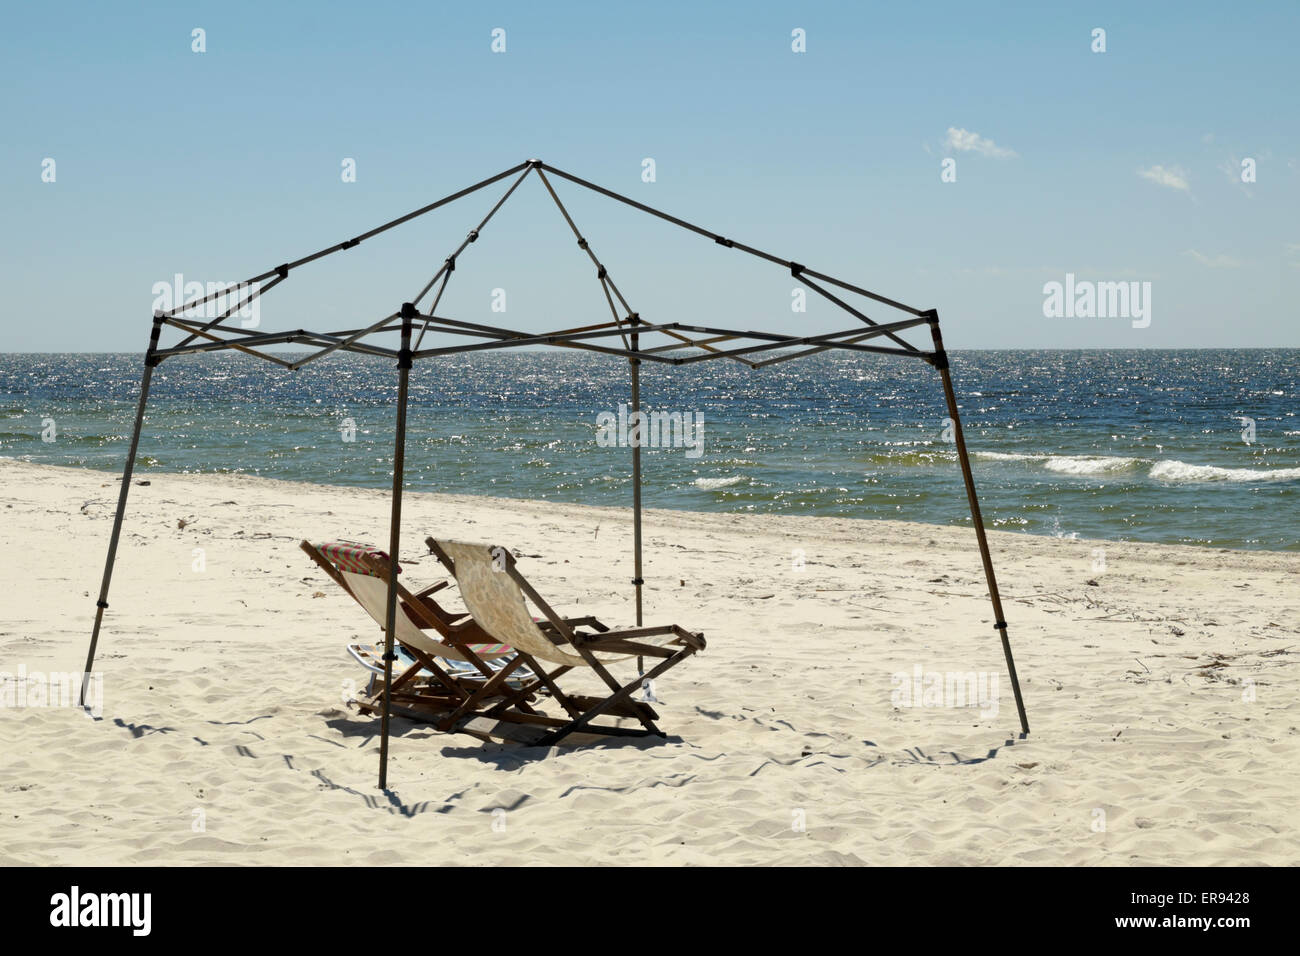 Metal framework for a canopy sits over a pair of chaise lounges on the beach of the Gulf of Mexico in deep south Alabama, USA Stock Photo